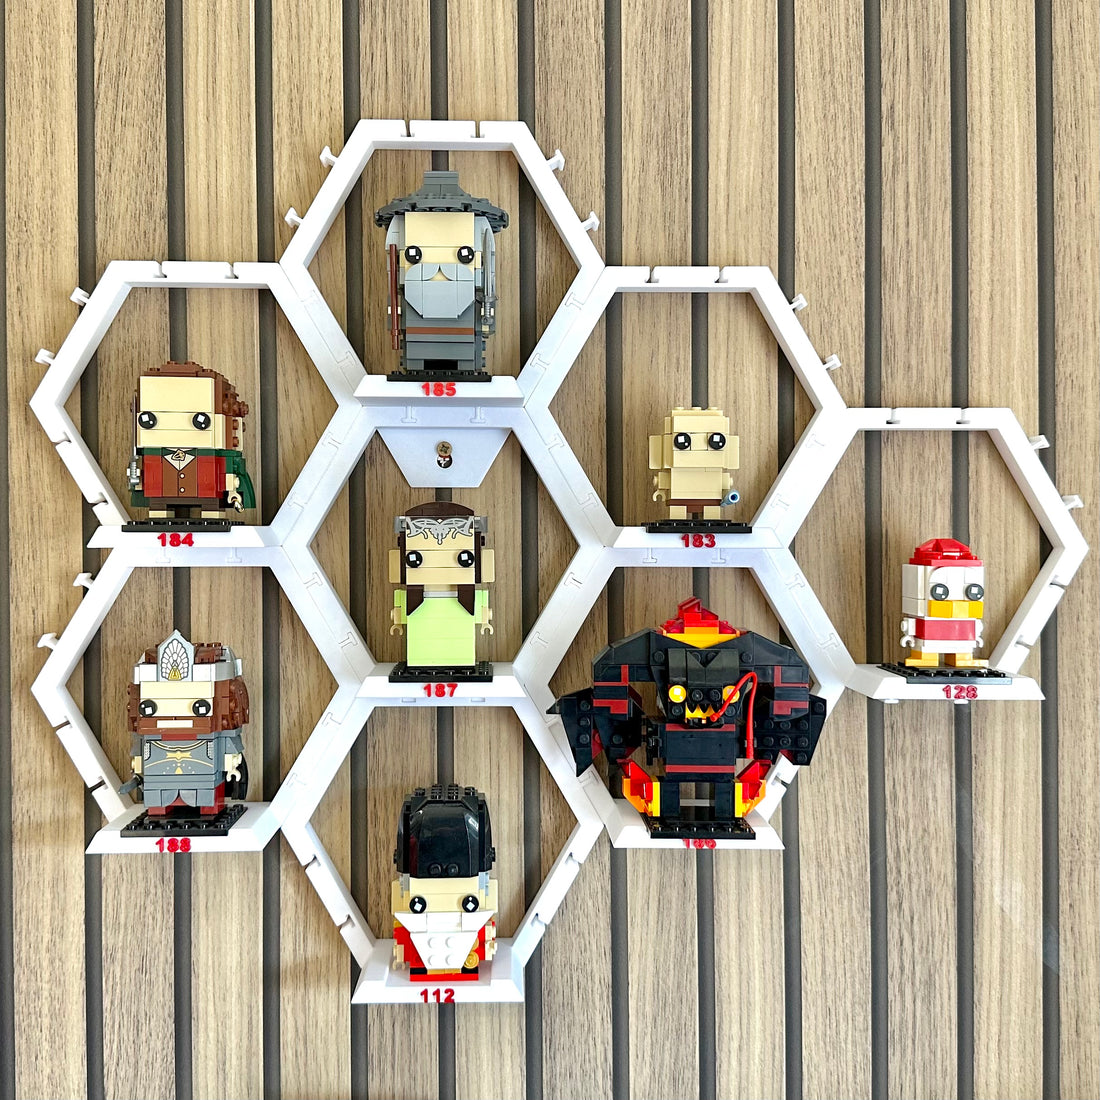 The Creation of the Hexagon Wall Mount for Brickheadz: A Journey from Idea to Innovation